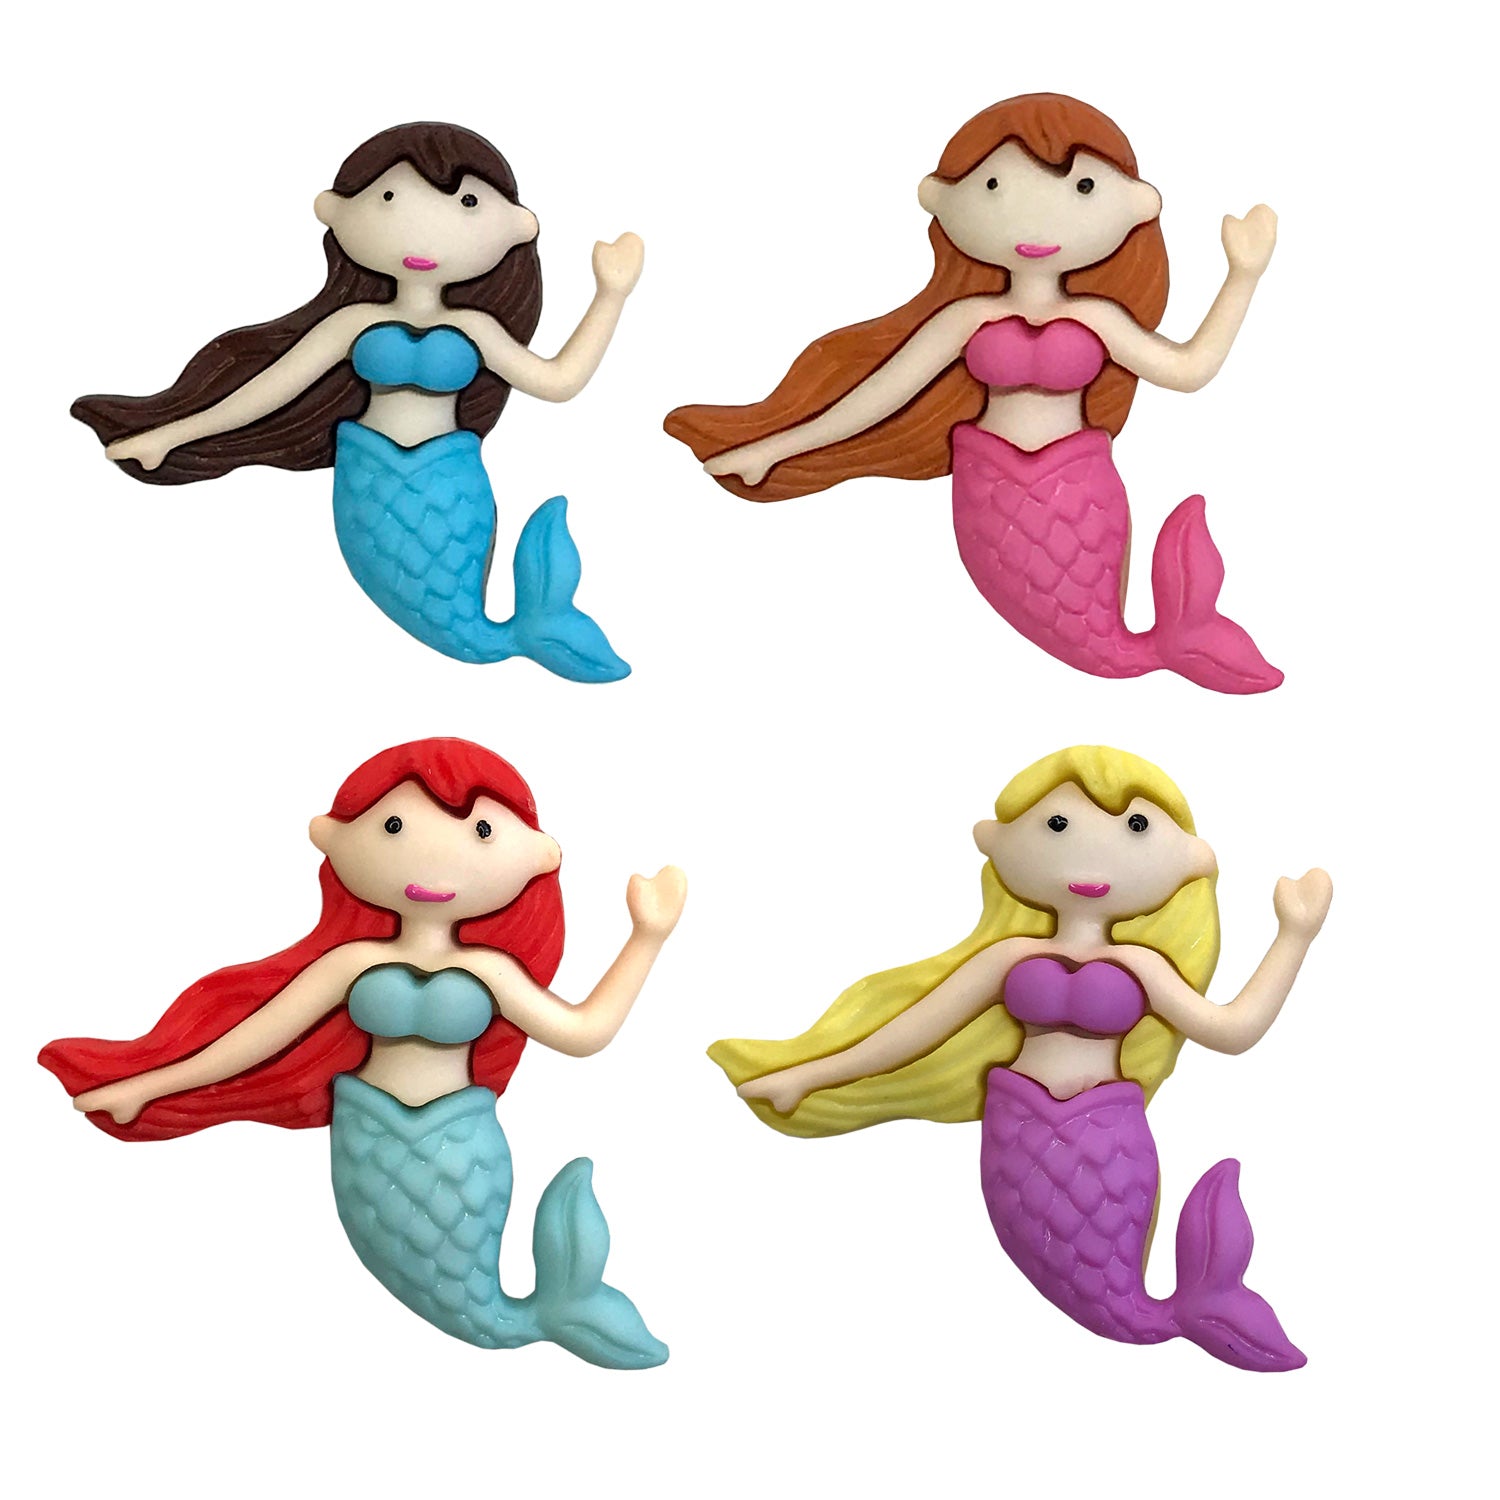 Mermaids - Buttons Galore and More